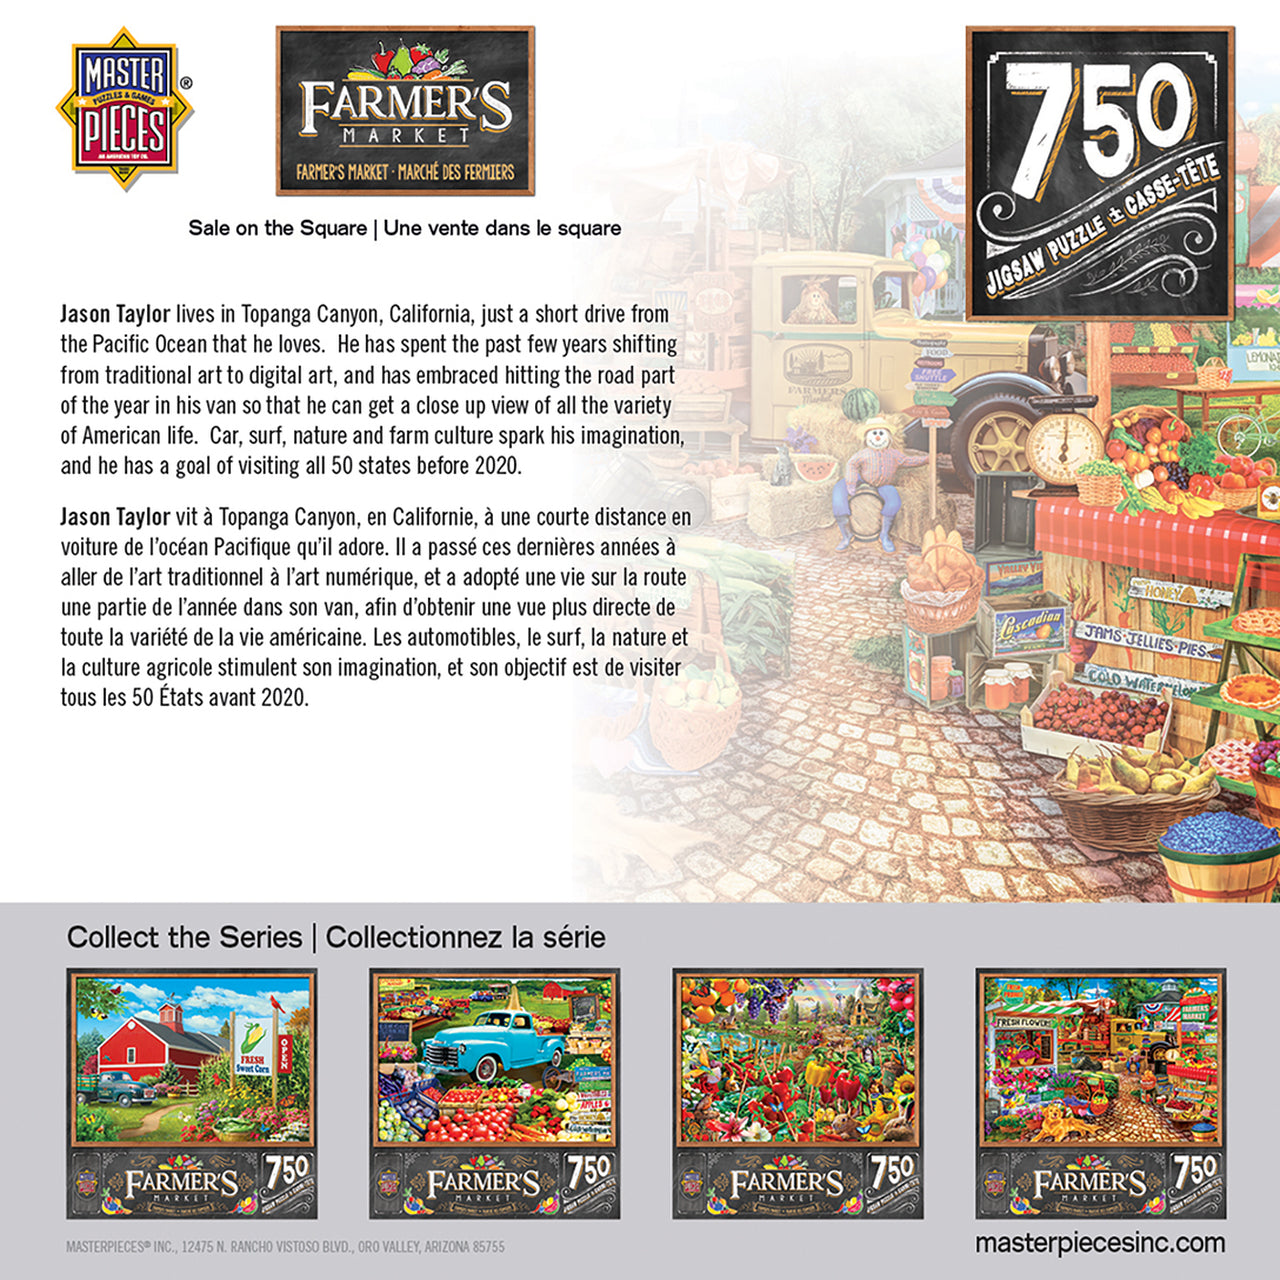 Farmer's Market - Sale on the Square - 750 Piece Jigsaw Puzzle by Masterpieces